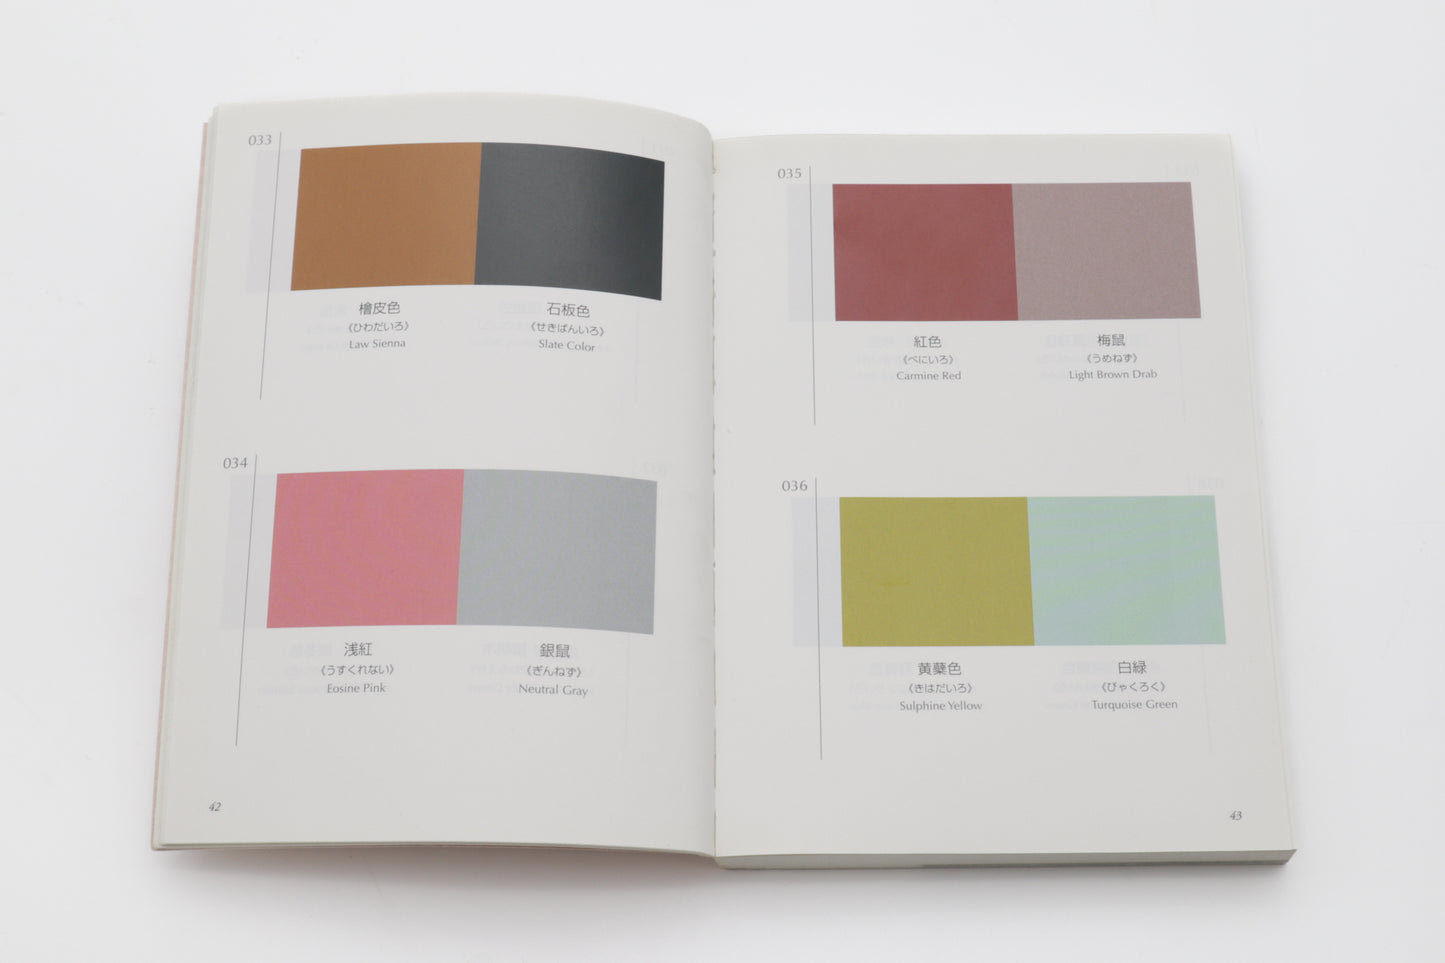 A Dictionary of Color Combinations